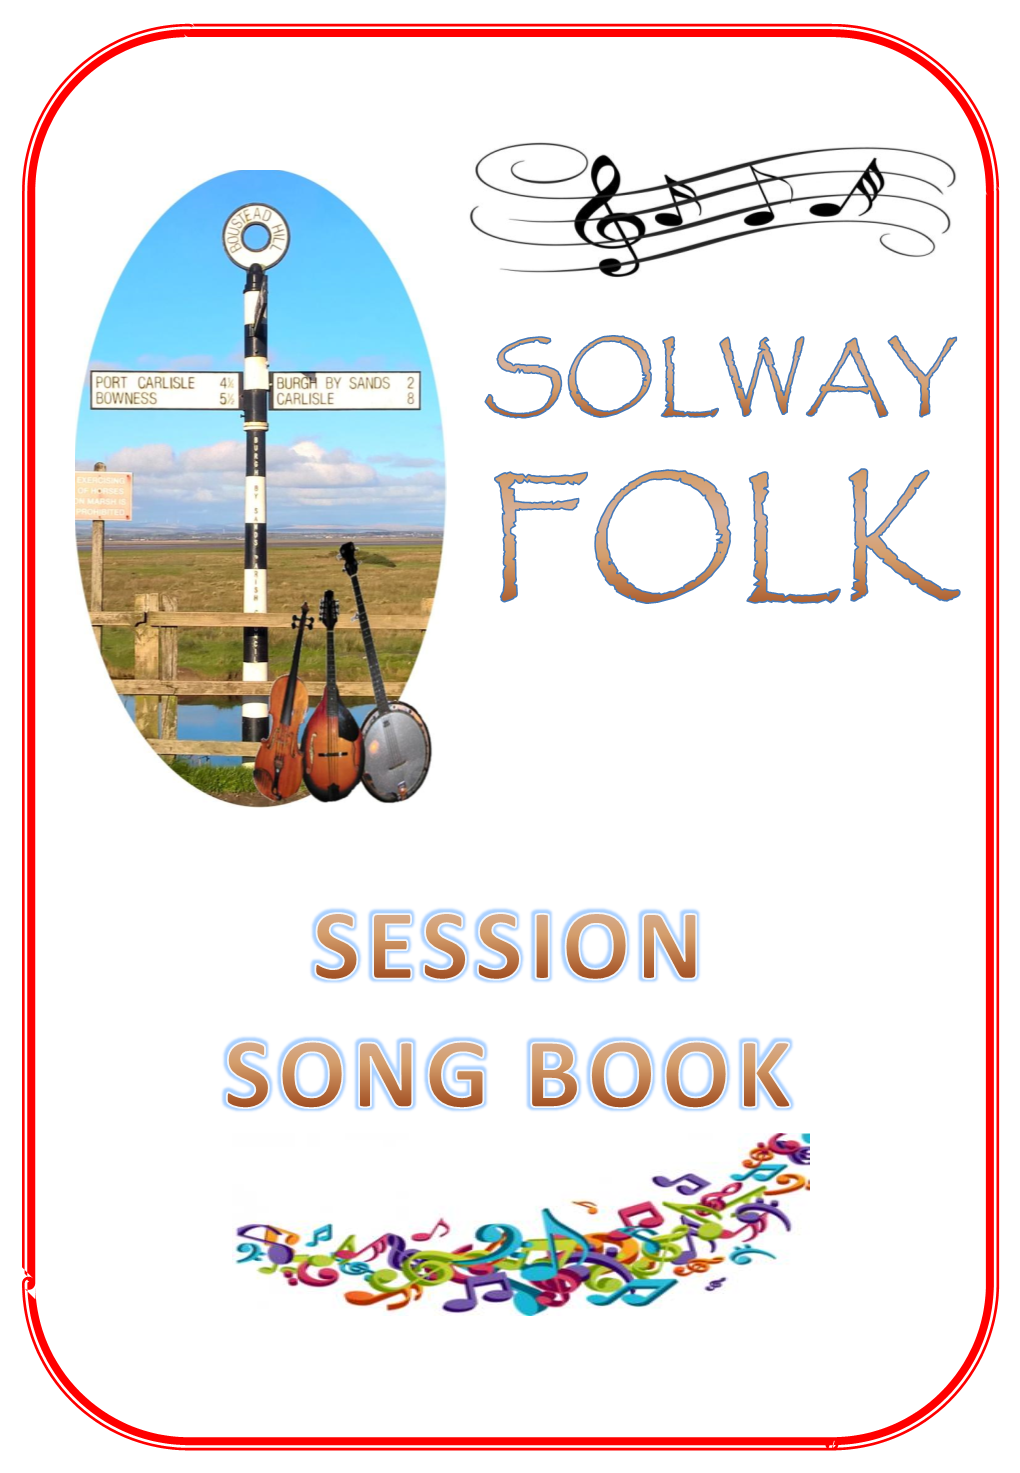 Session Songbook